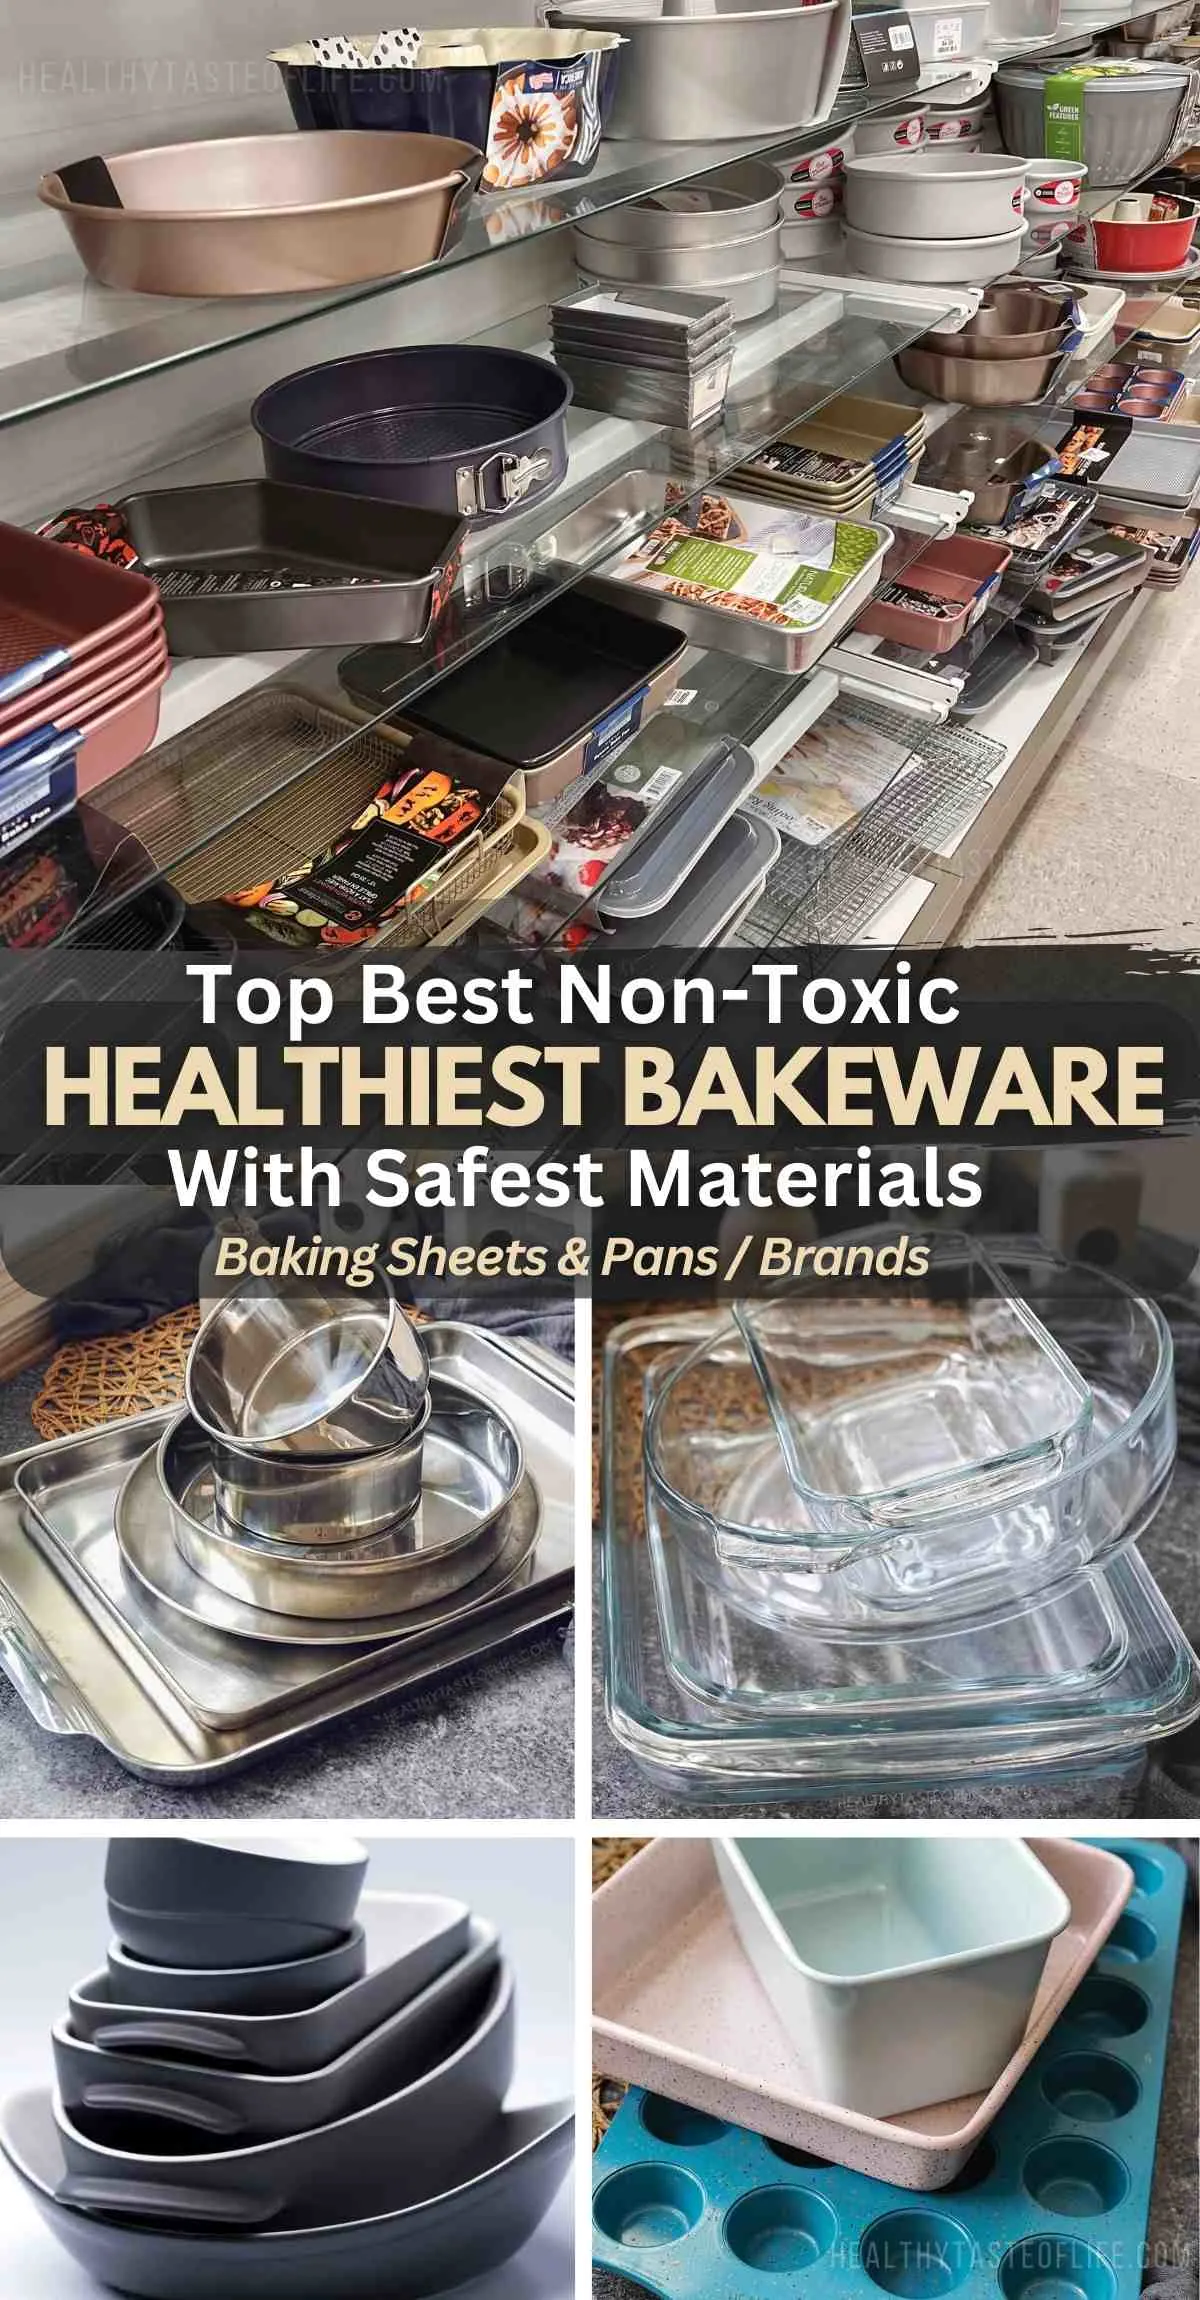 A simple guide to the best non-toxic bakeware, highlighting the importance of switching to non-toxic baking sheets and pans! We'll look into the healthiest and the safest bakeware materials available, by their type and by purpose, as well as reputable companies, and top picks available online. #NonToxicBakeware #HealthyCooking #bakingsheet #bakingpan #healthy